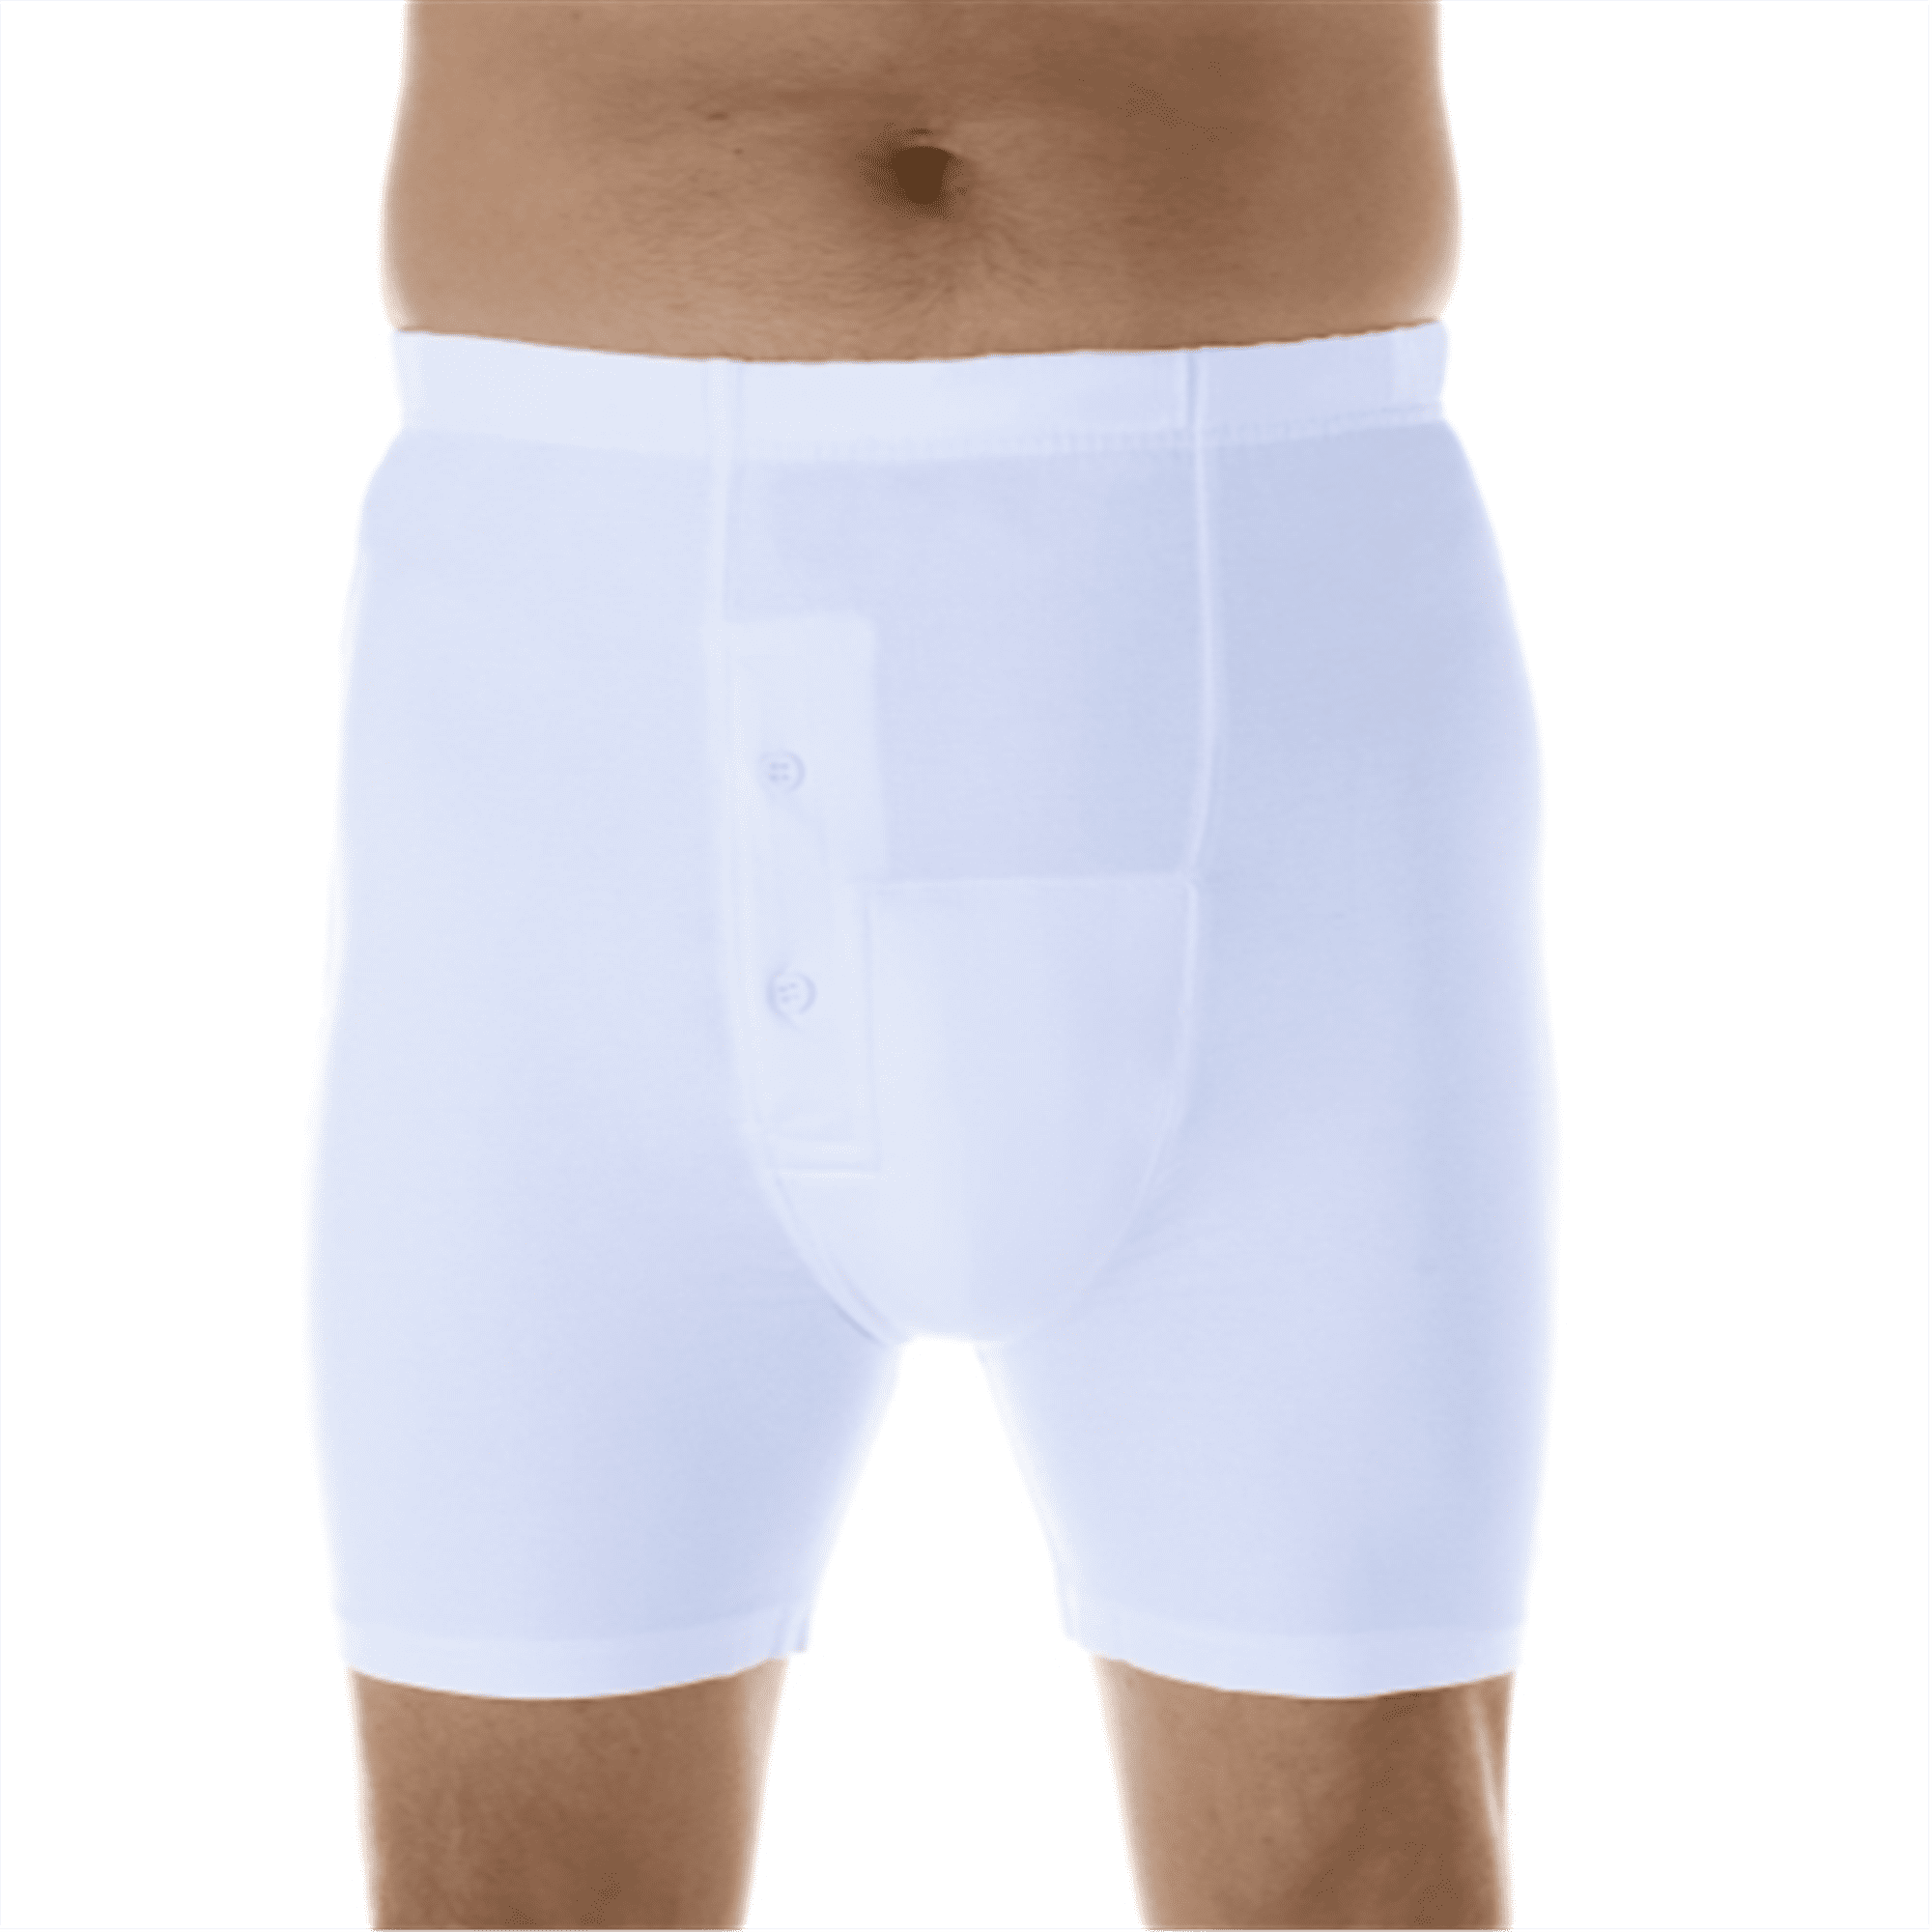 On white underwear male stain How To